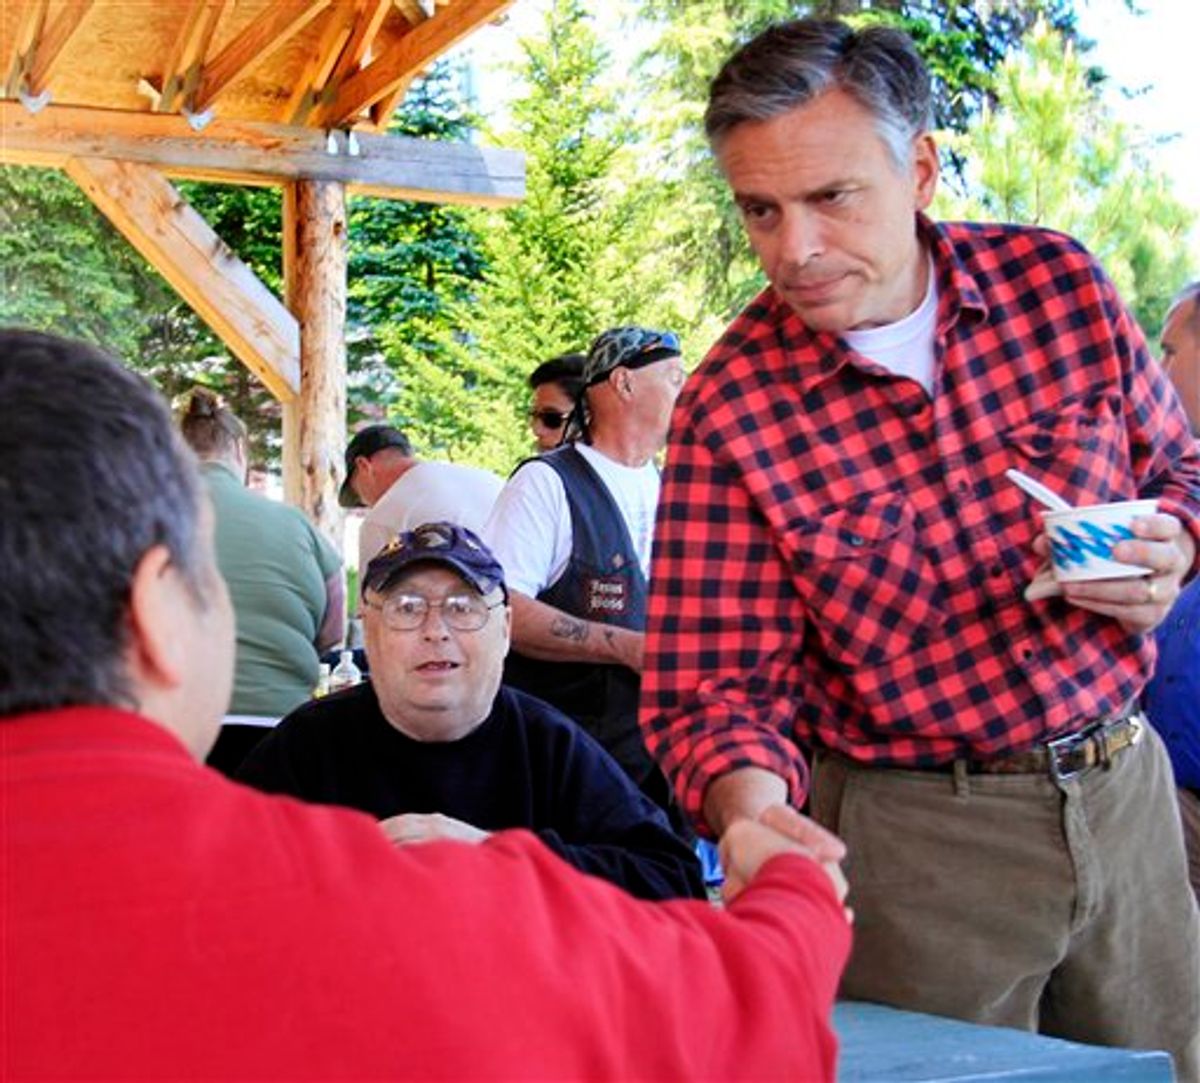 With his wife Mary Kaye at his side possible 2012 presidential hopeful, former Republican Gov. Jon Huntsman, Jr., of Utah shakes hands during a cultural festival at Heritage Park, Saturday, June 4, 2011 in Berlin, N.H. (AP Photo/Jim Cole) (AP)